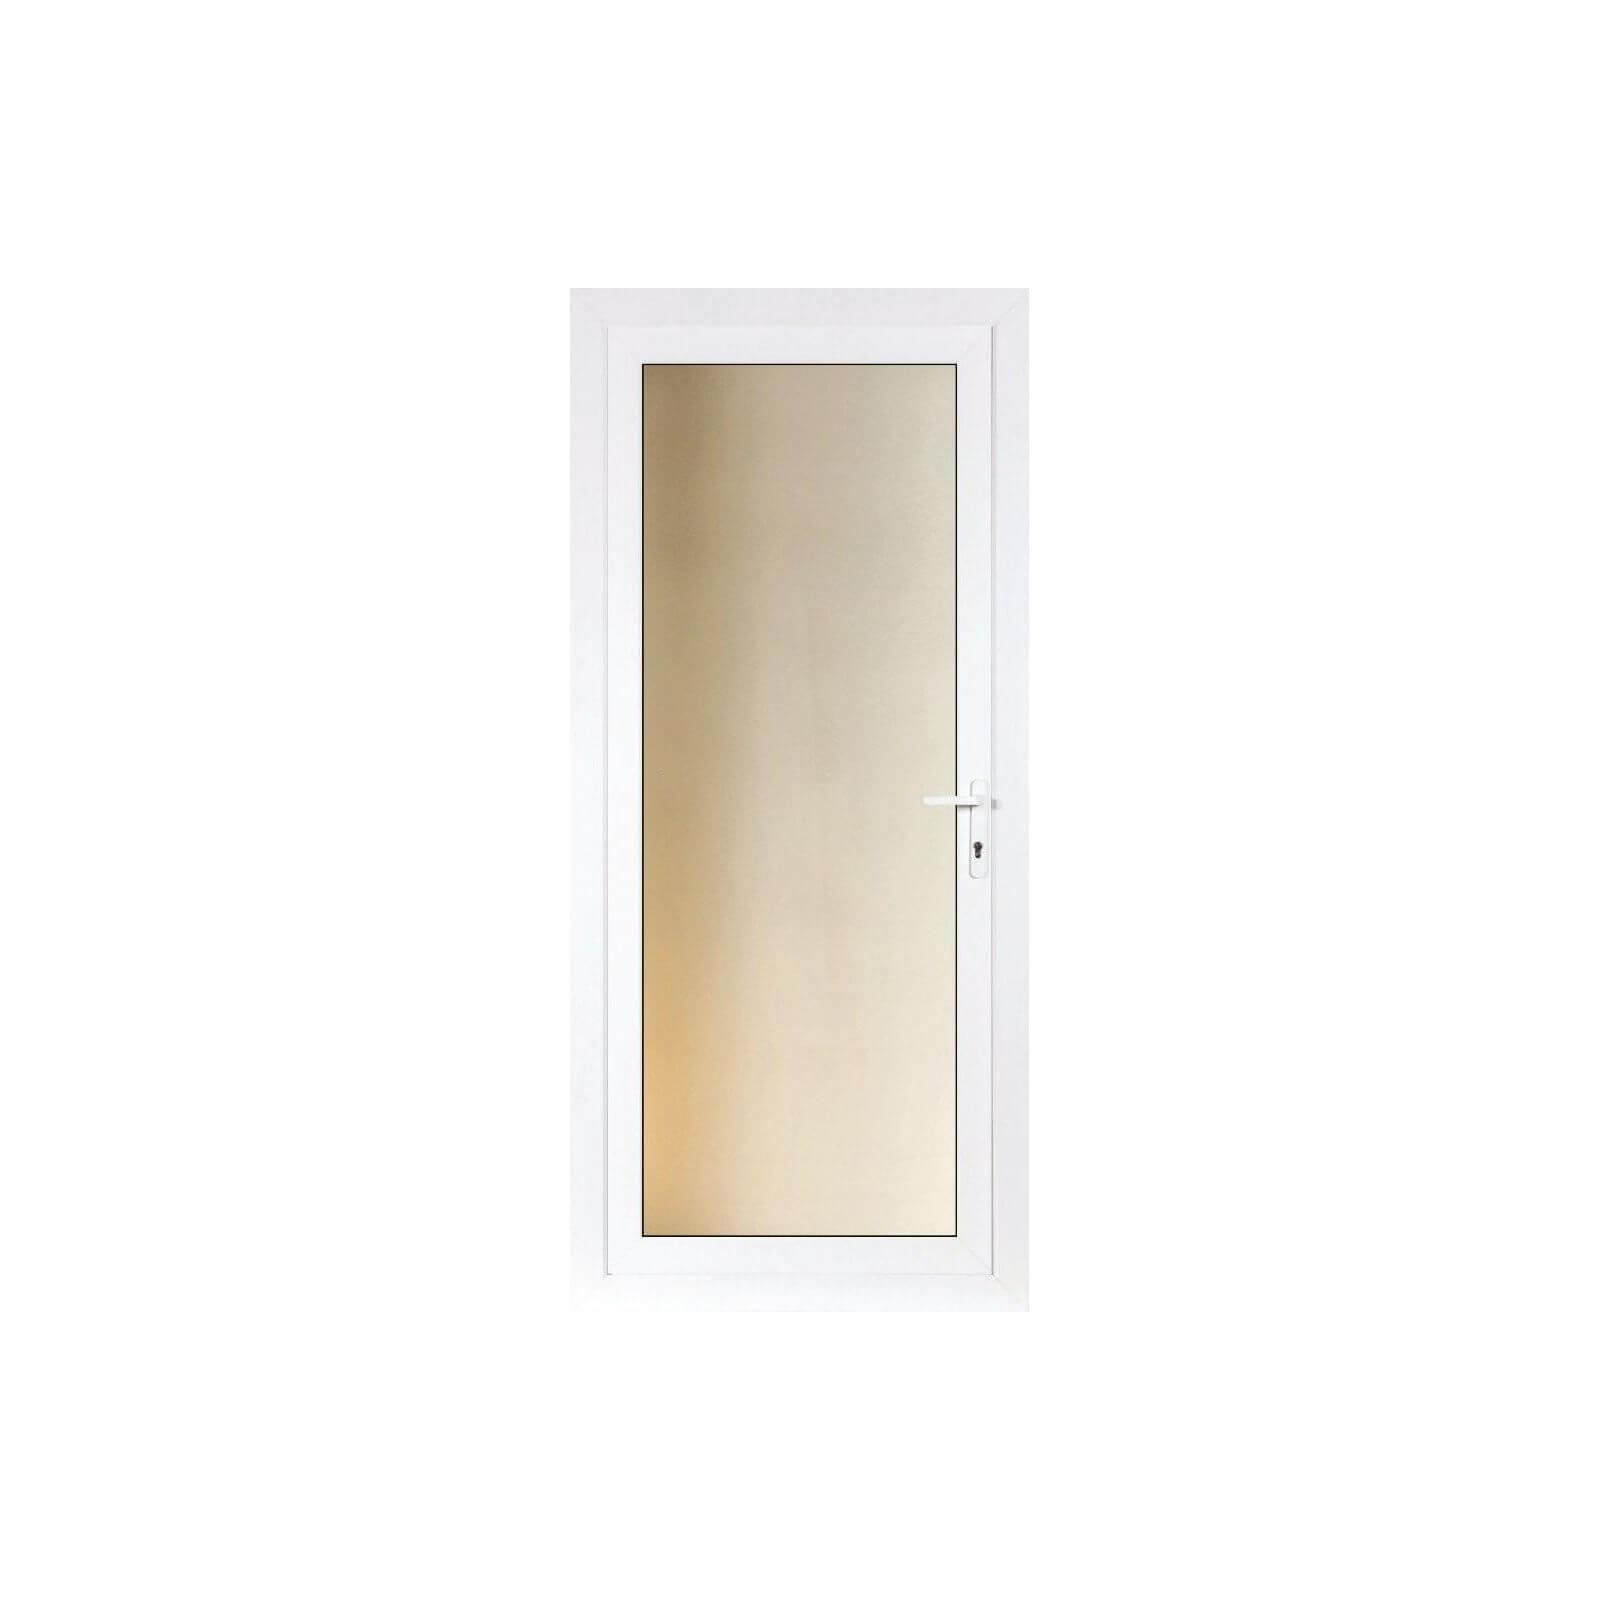 Brighton Rear Door Set - Full Obscure Glass Left Hand Hung - 840mm Wide 2085mm High